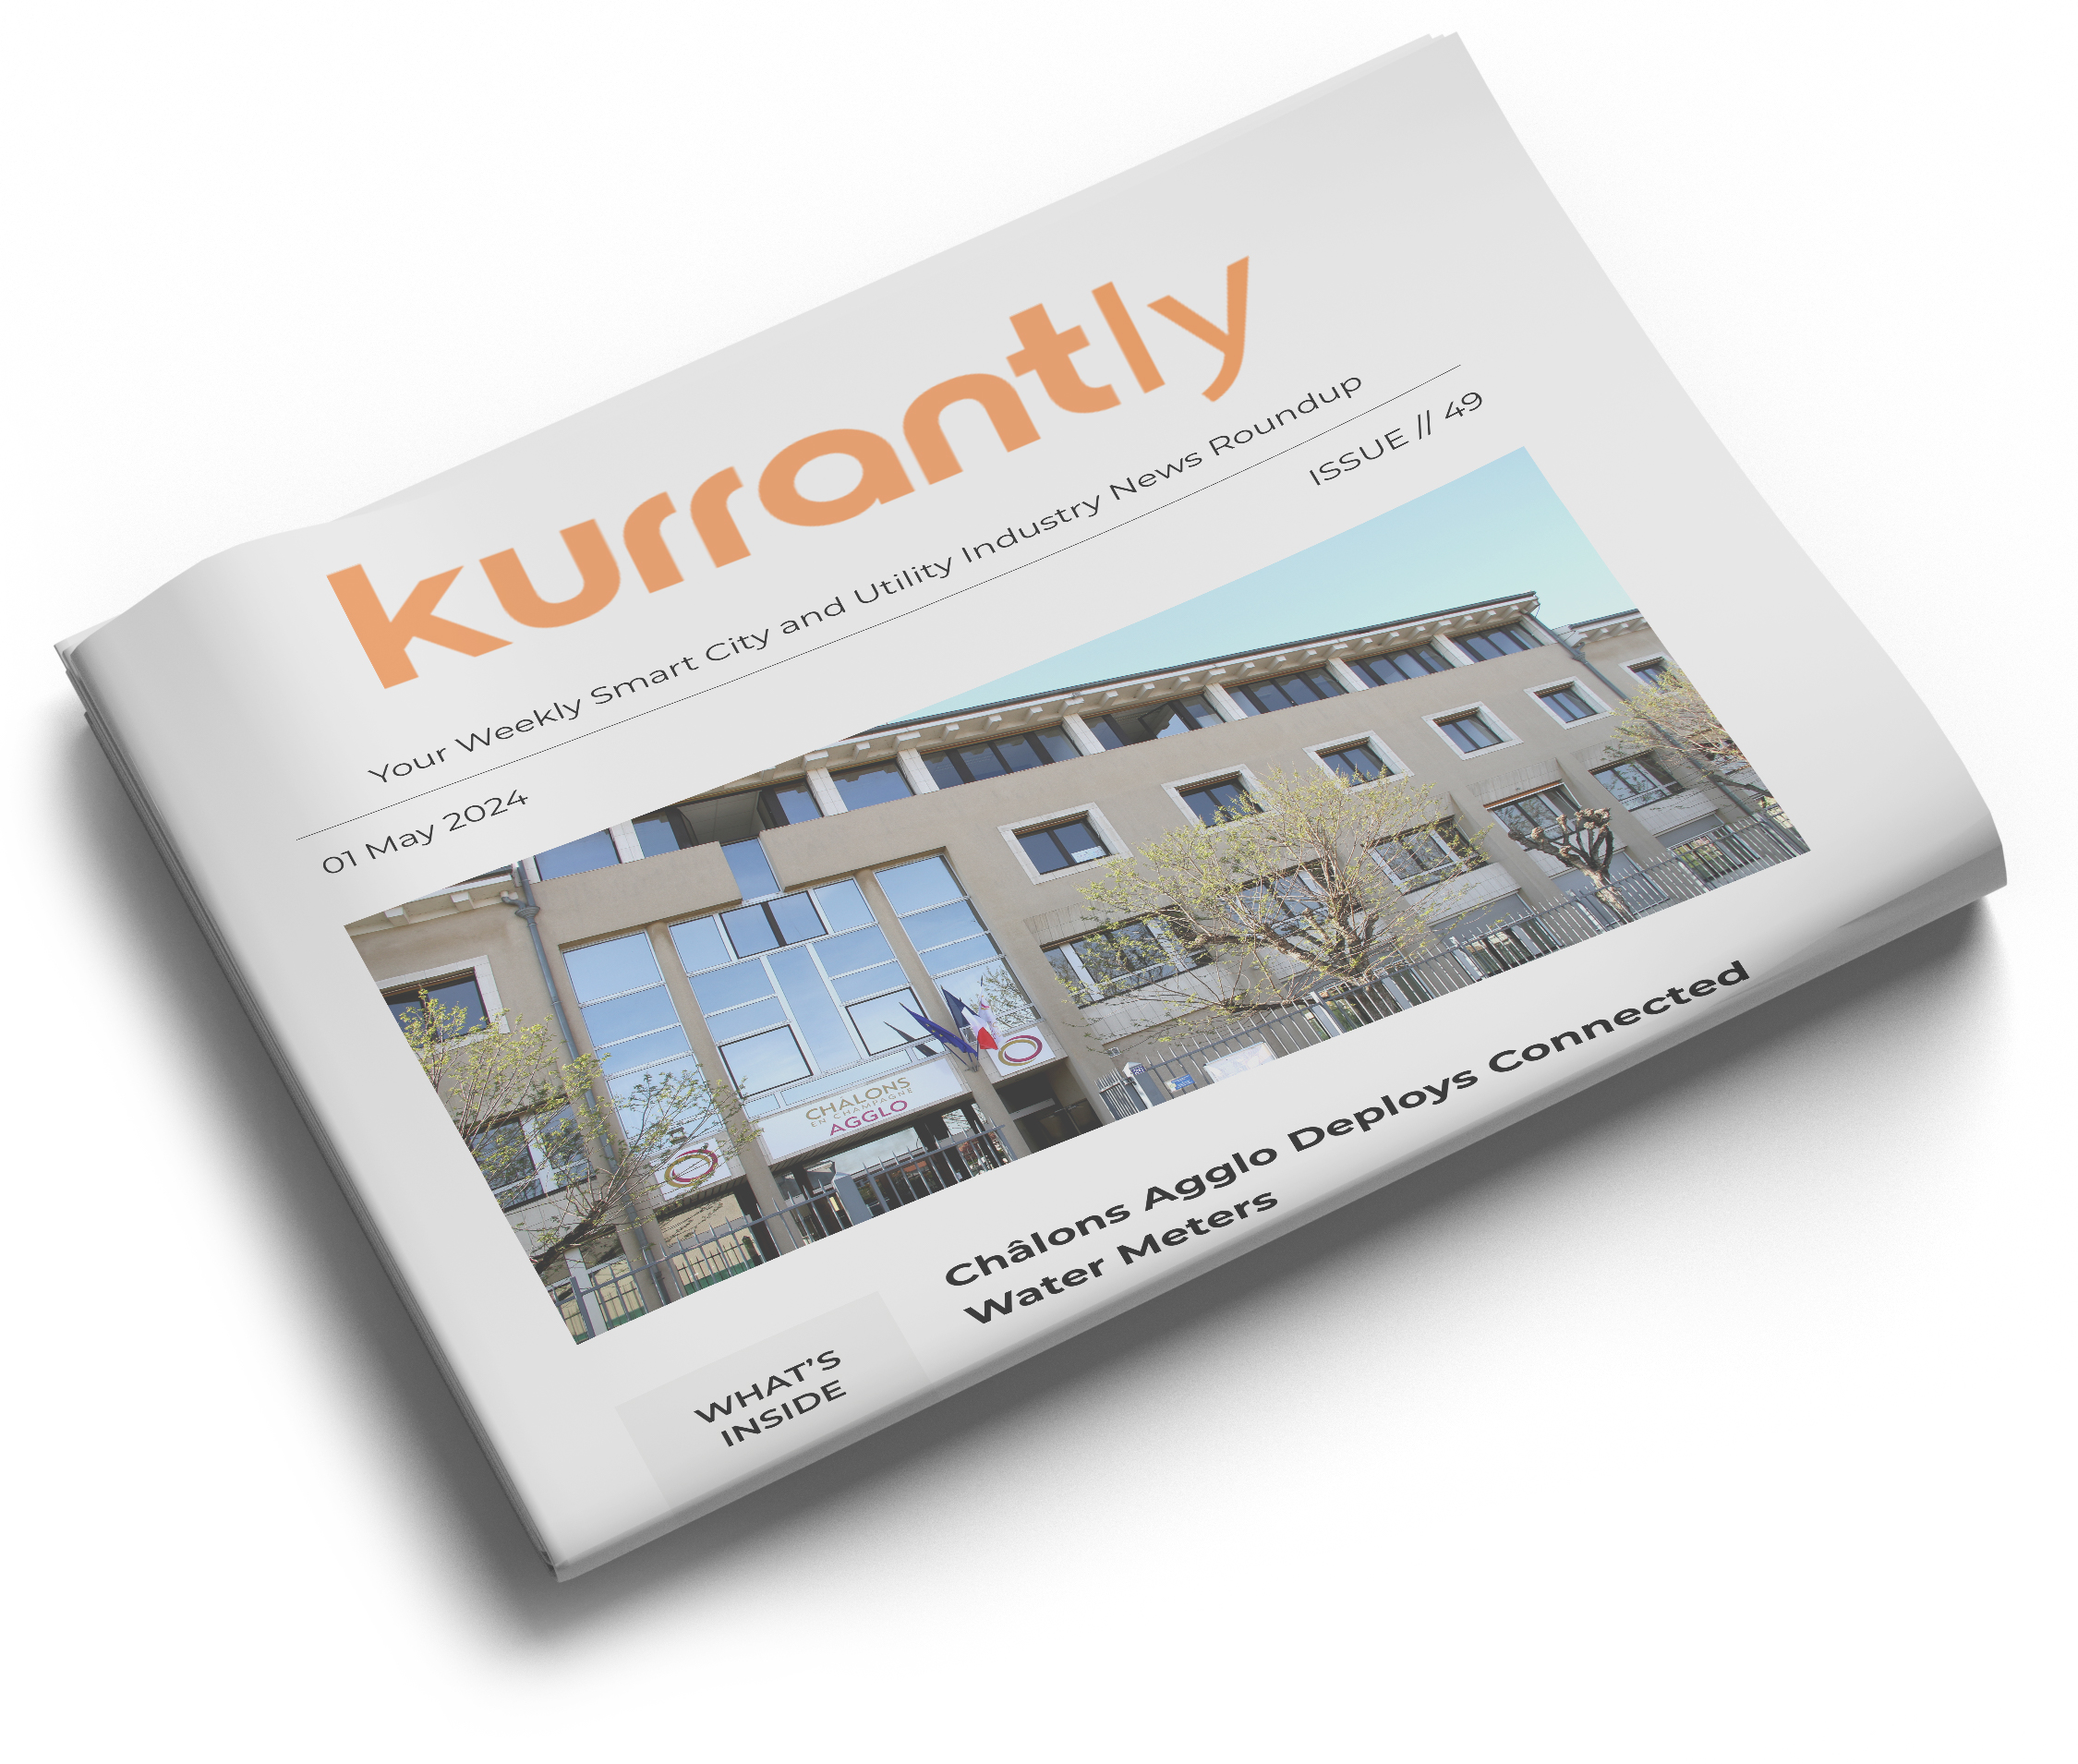 Kurrantly Smart City News of 1 may 2024 Cover